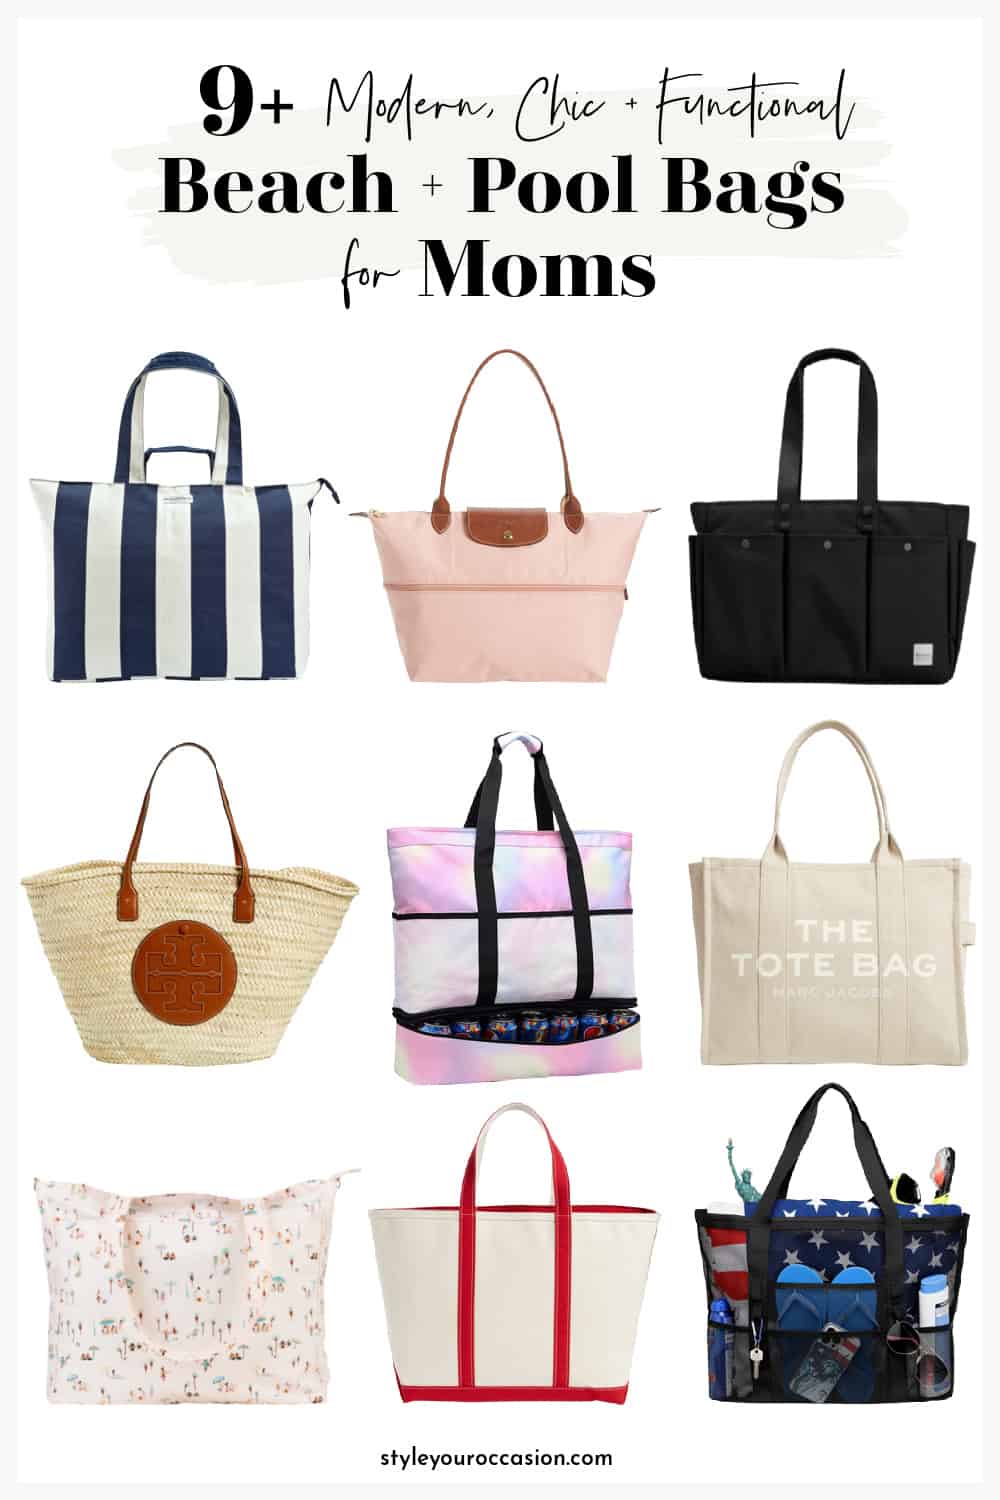 Best Beach Bag for Moms: 10 Beach & Pool Bags for Function + Style